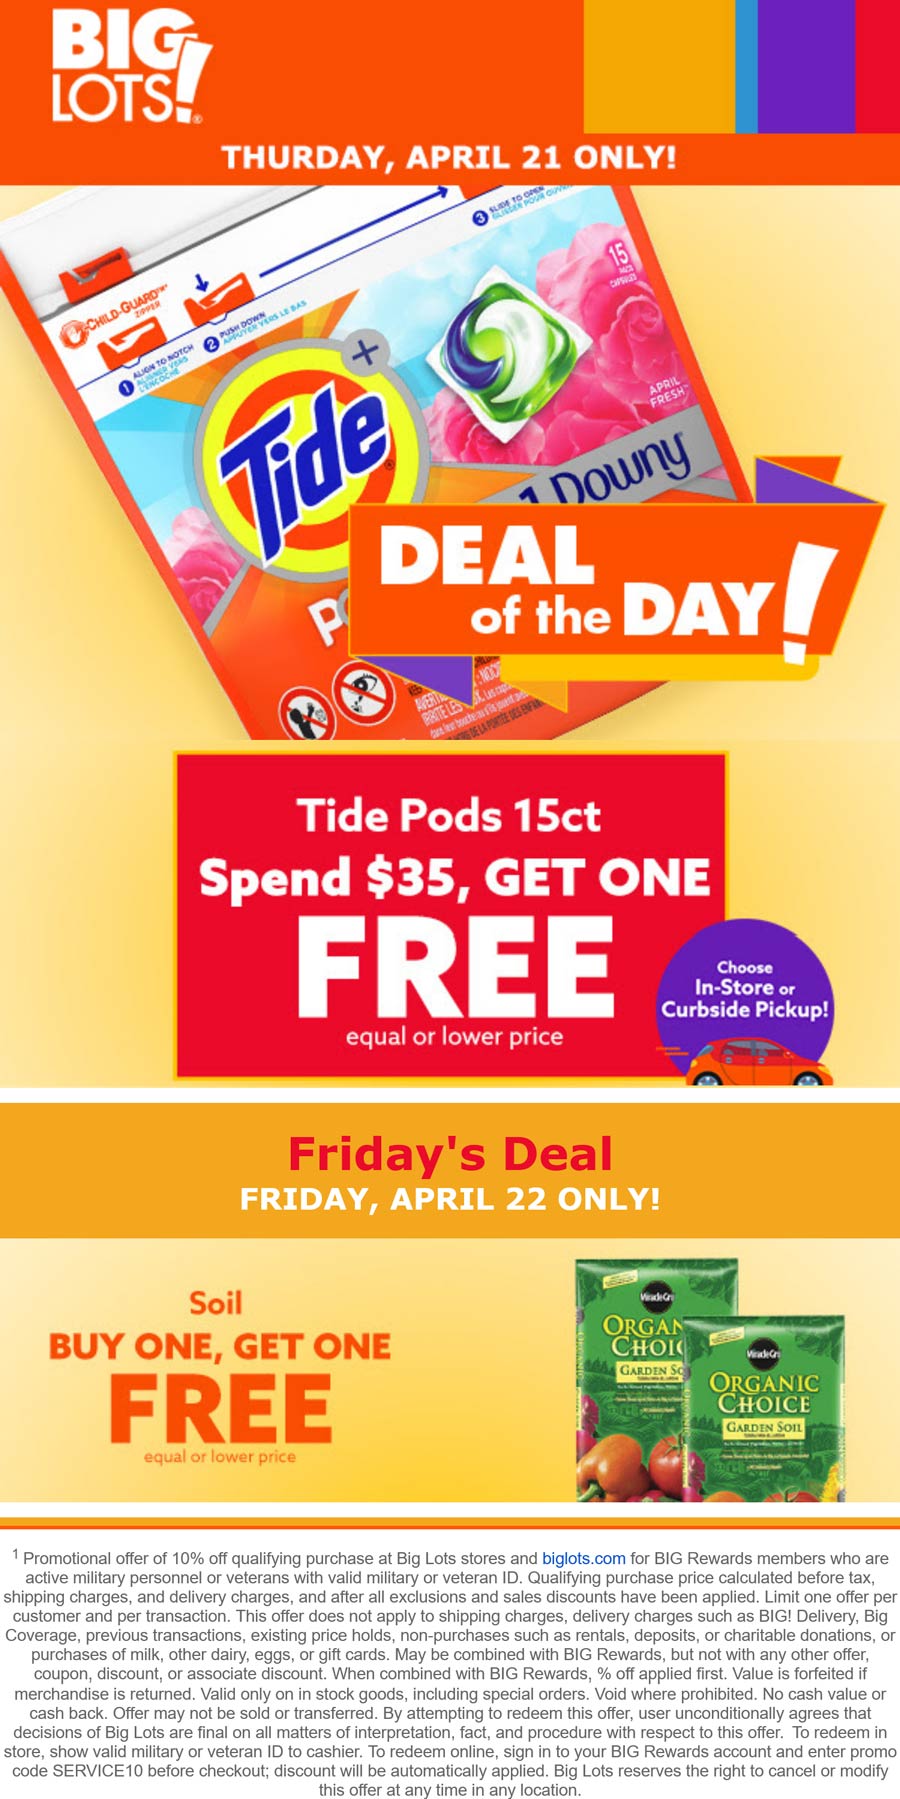 Big Lots stores Coupon  Free tide pods on $35 today at Big Lots #biglots 